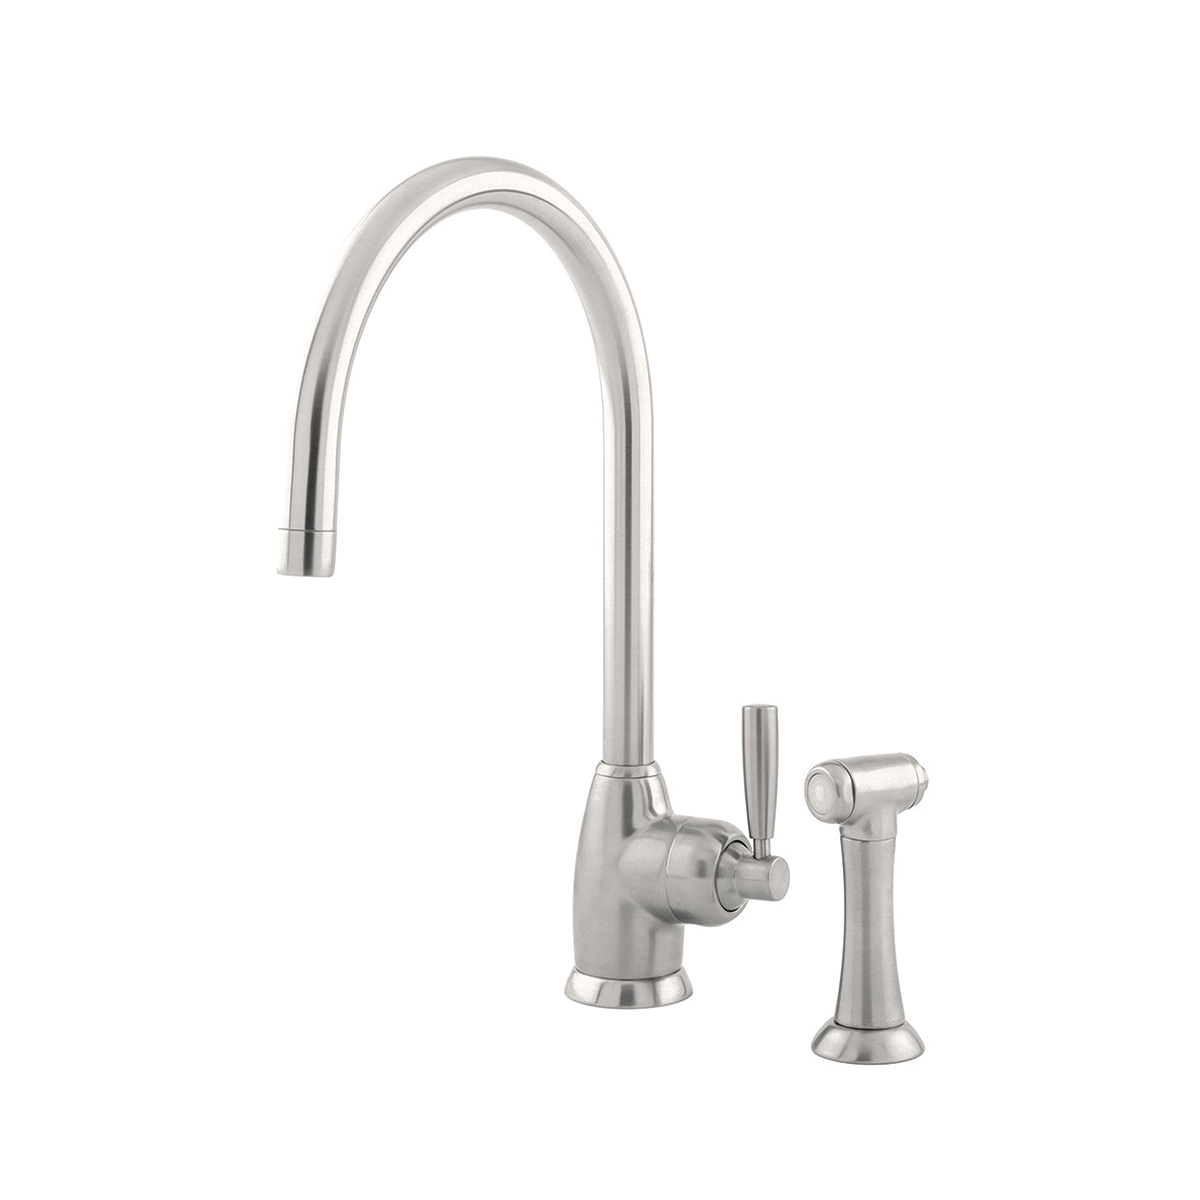 Shaws by Perrin & Rowe Roeburn kitchen mixer with spray rinse in Pewter. Mimas style monobloc kitchen tap AUSH.4846. Distributed in Australia by Luxe by Design, Brisbane.